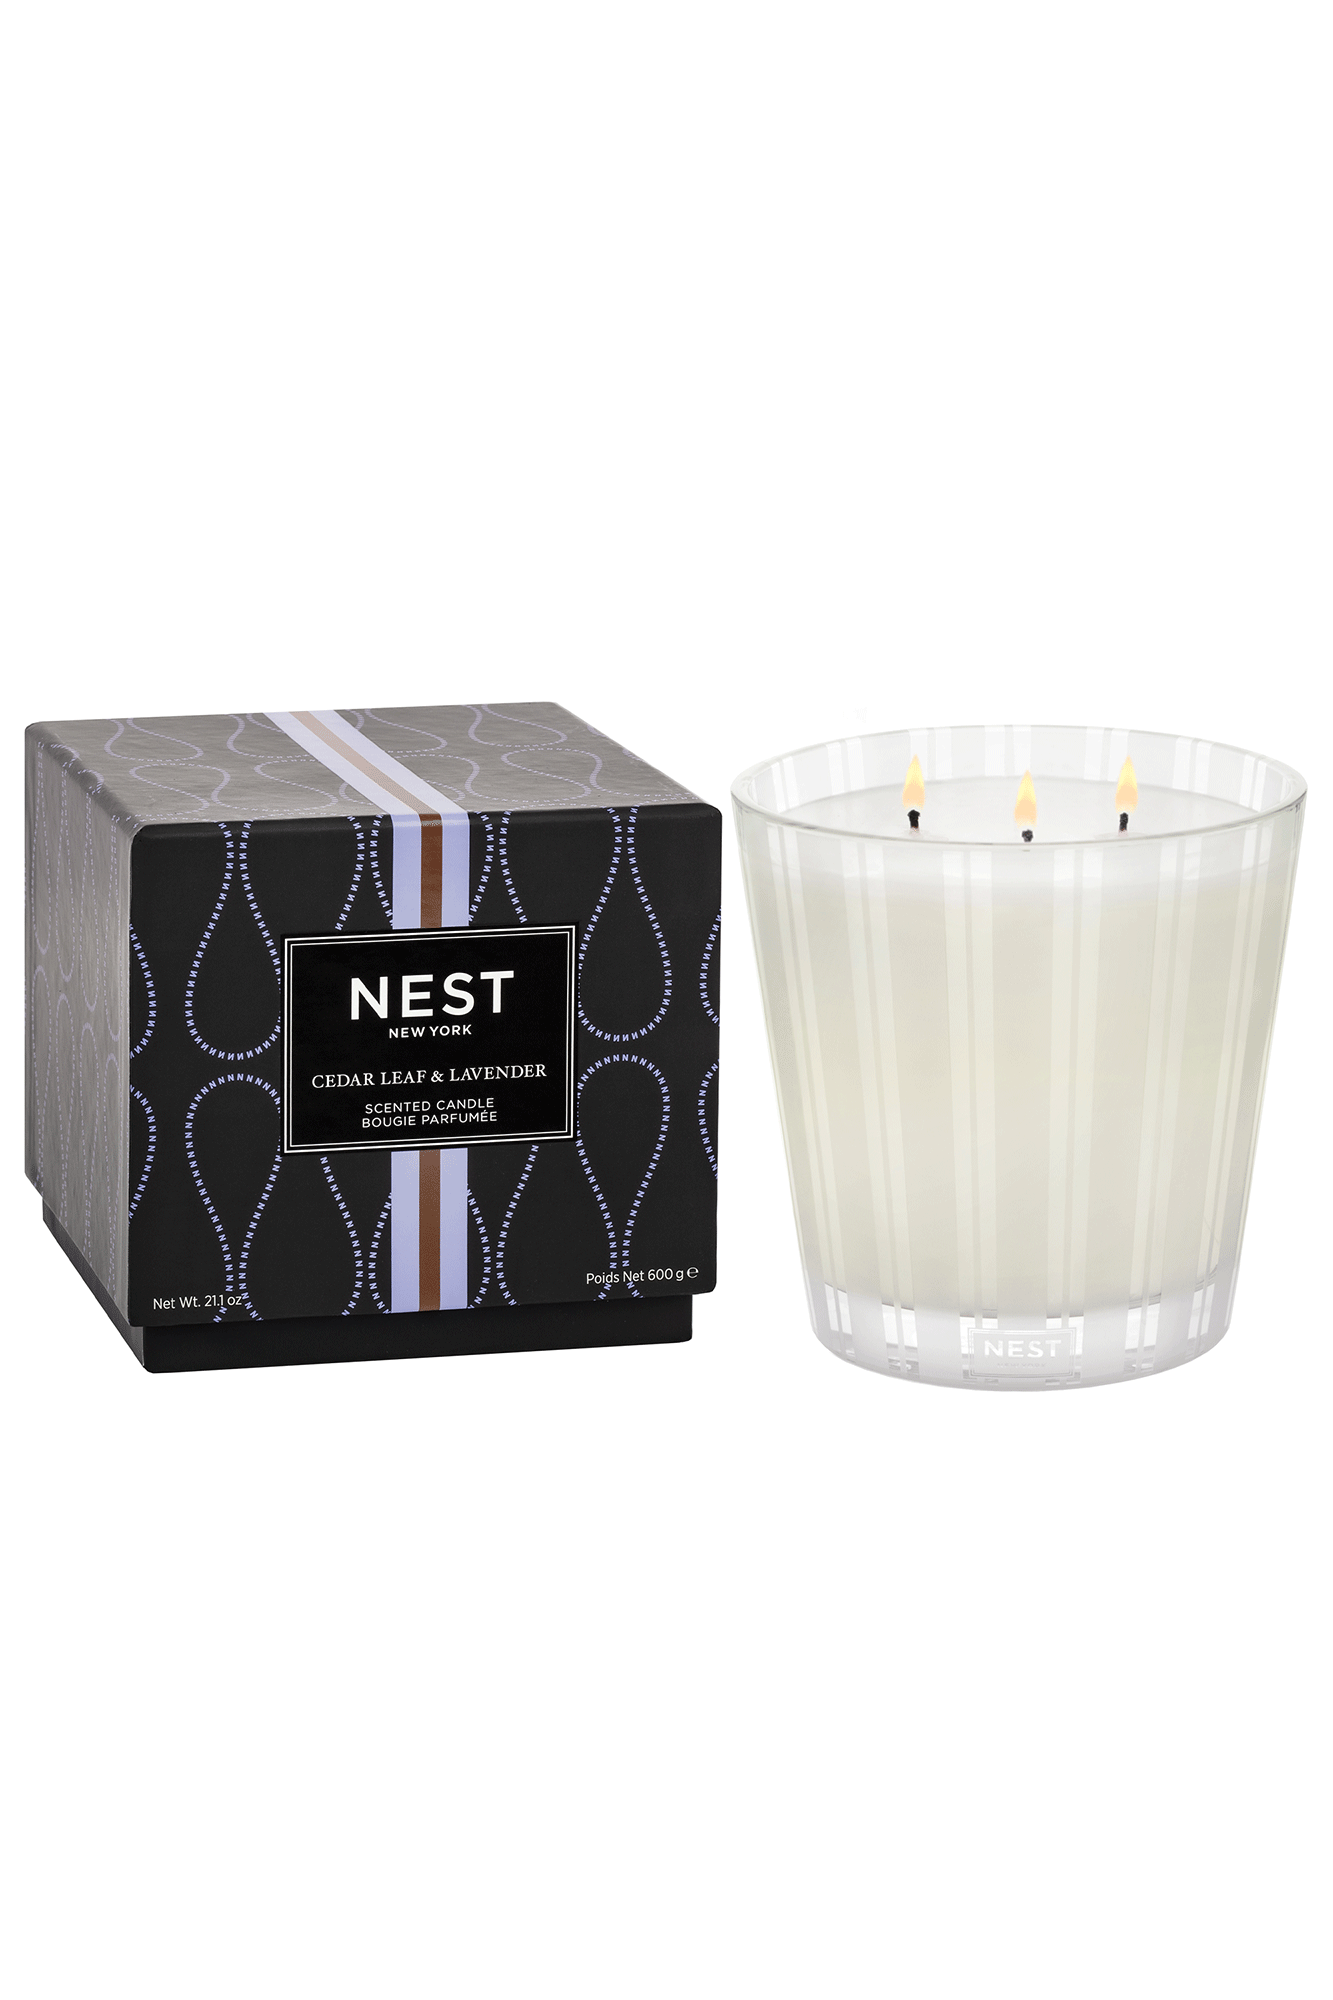 Create a calming, spa-like atmosphere with this 3 Wick Candle from Nest. Featuring a blend of rosemary, lavender, and sage with cedar leaves, it provides an herbaceous scent to any room. Enhance your ambiance with this long-lasting candle.